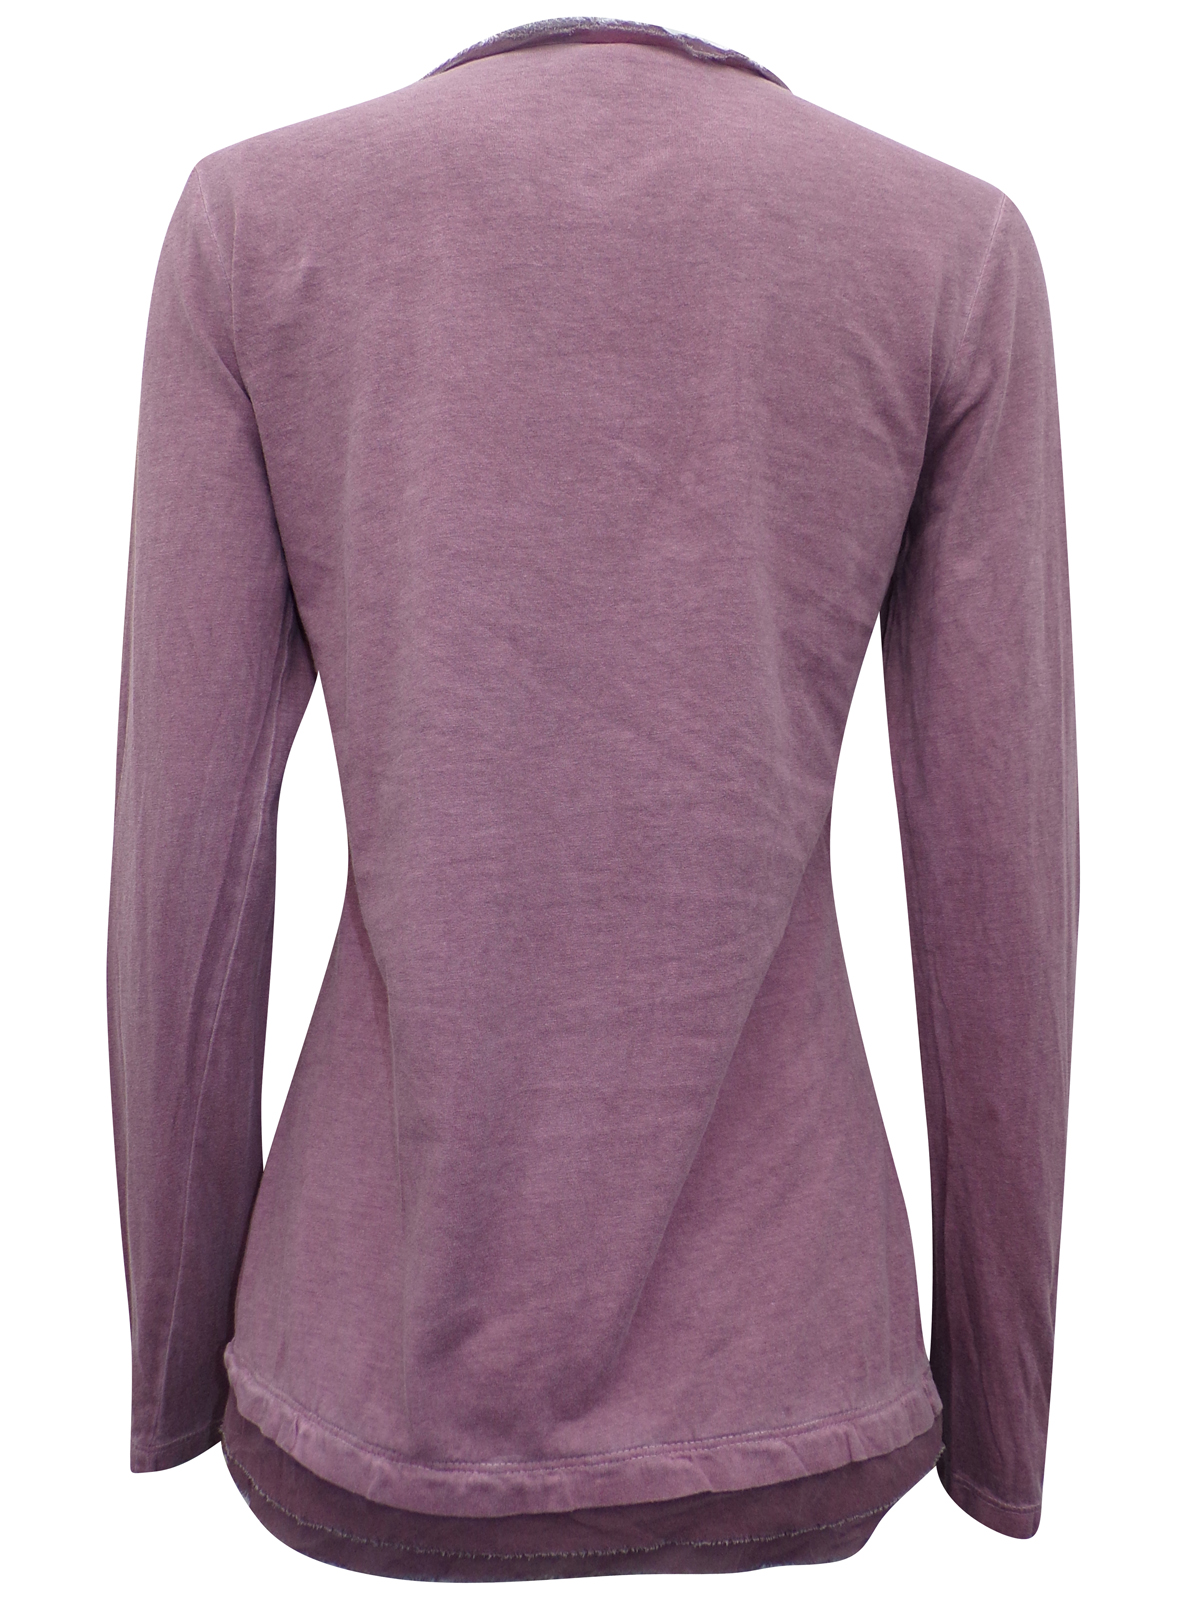 S.Oliver - Triangle - - S.Oliver PURPLE Pure Cotton Layered Trim Long ...